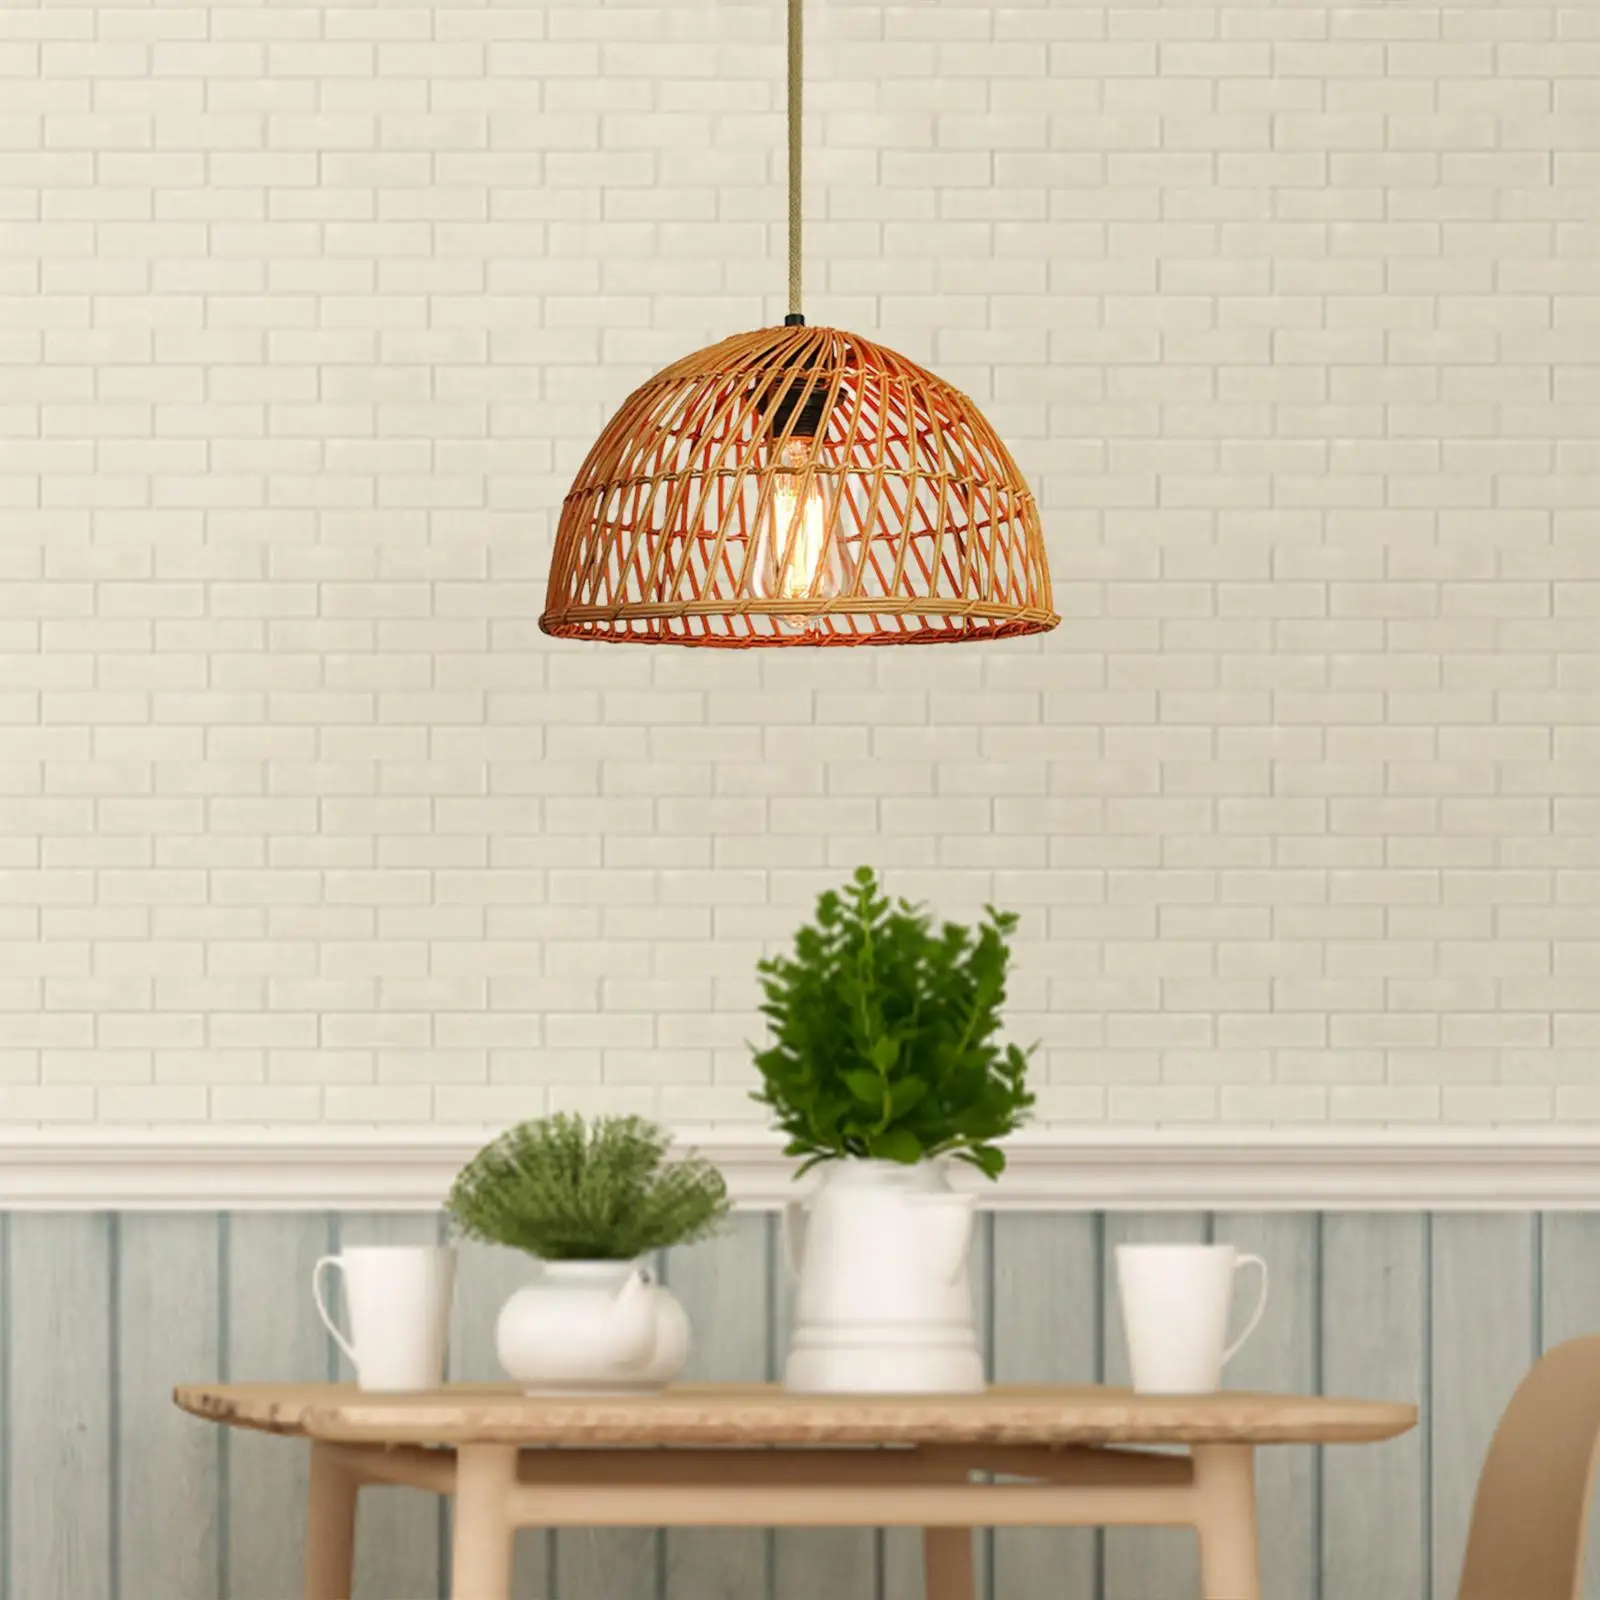 Japanese Style Antique Pendant Lamp Shade Handmade Dome Hanging Ceiling Lampshade for Living Room Cafe Bar Bedroom Kitchen